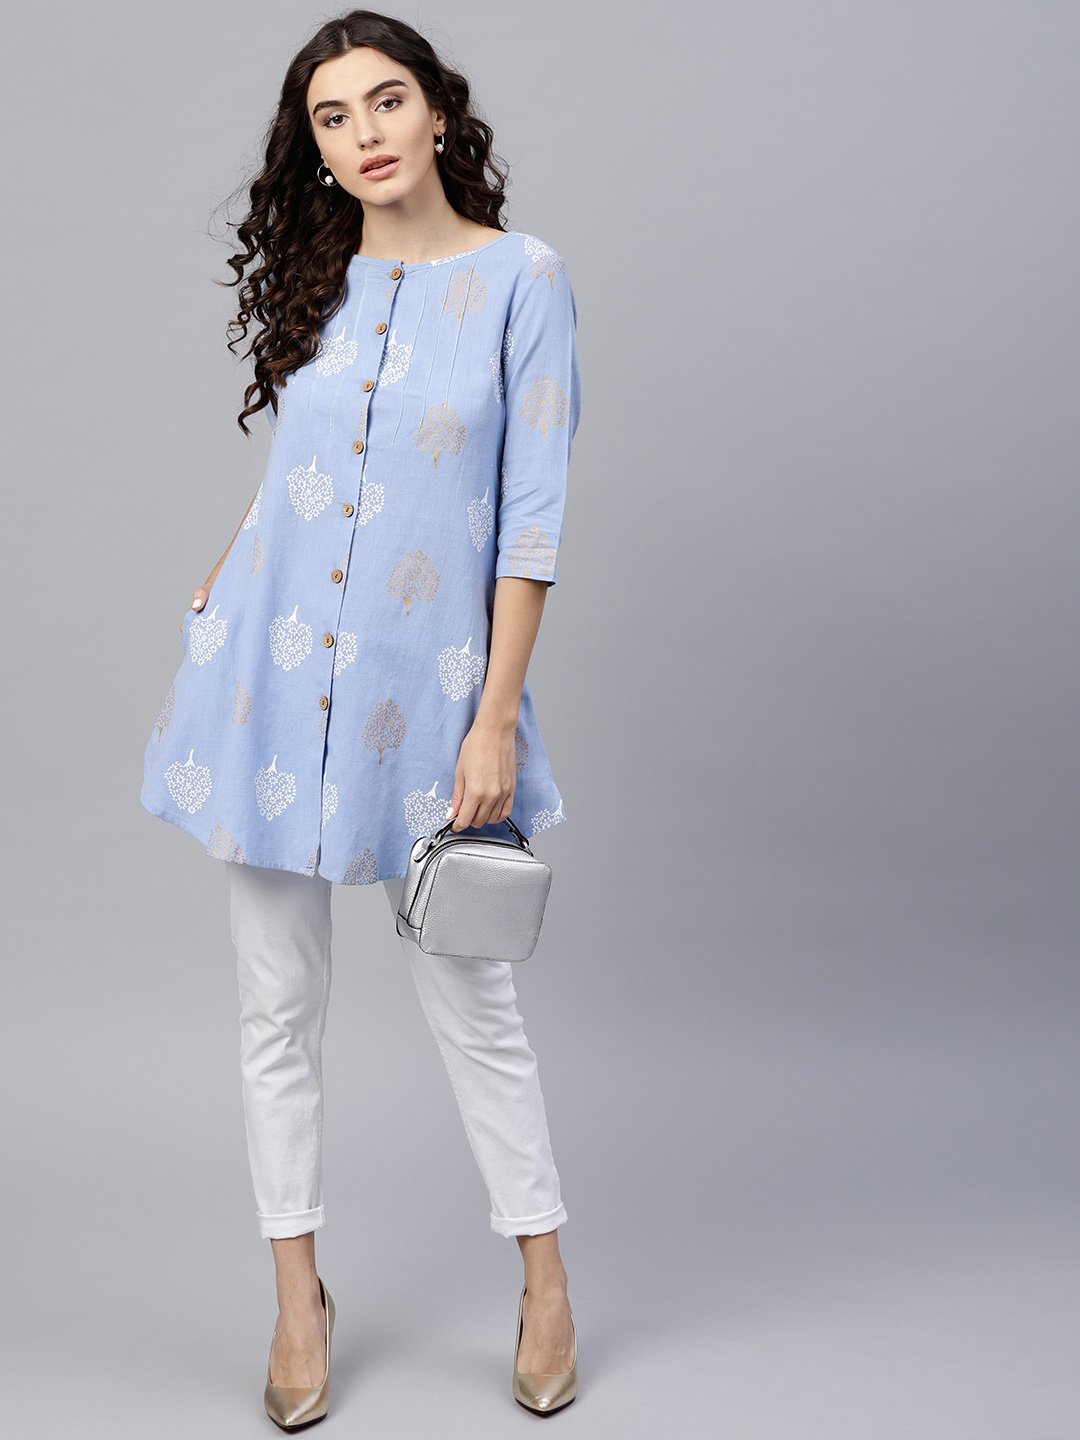 Women's Round Neck Light Blue Printed Tunic With Front Placket And 3/4 Sleeves - Nayo Clothing